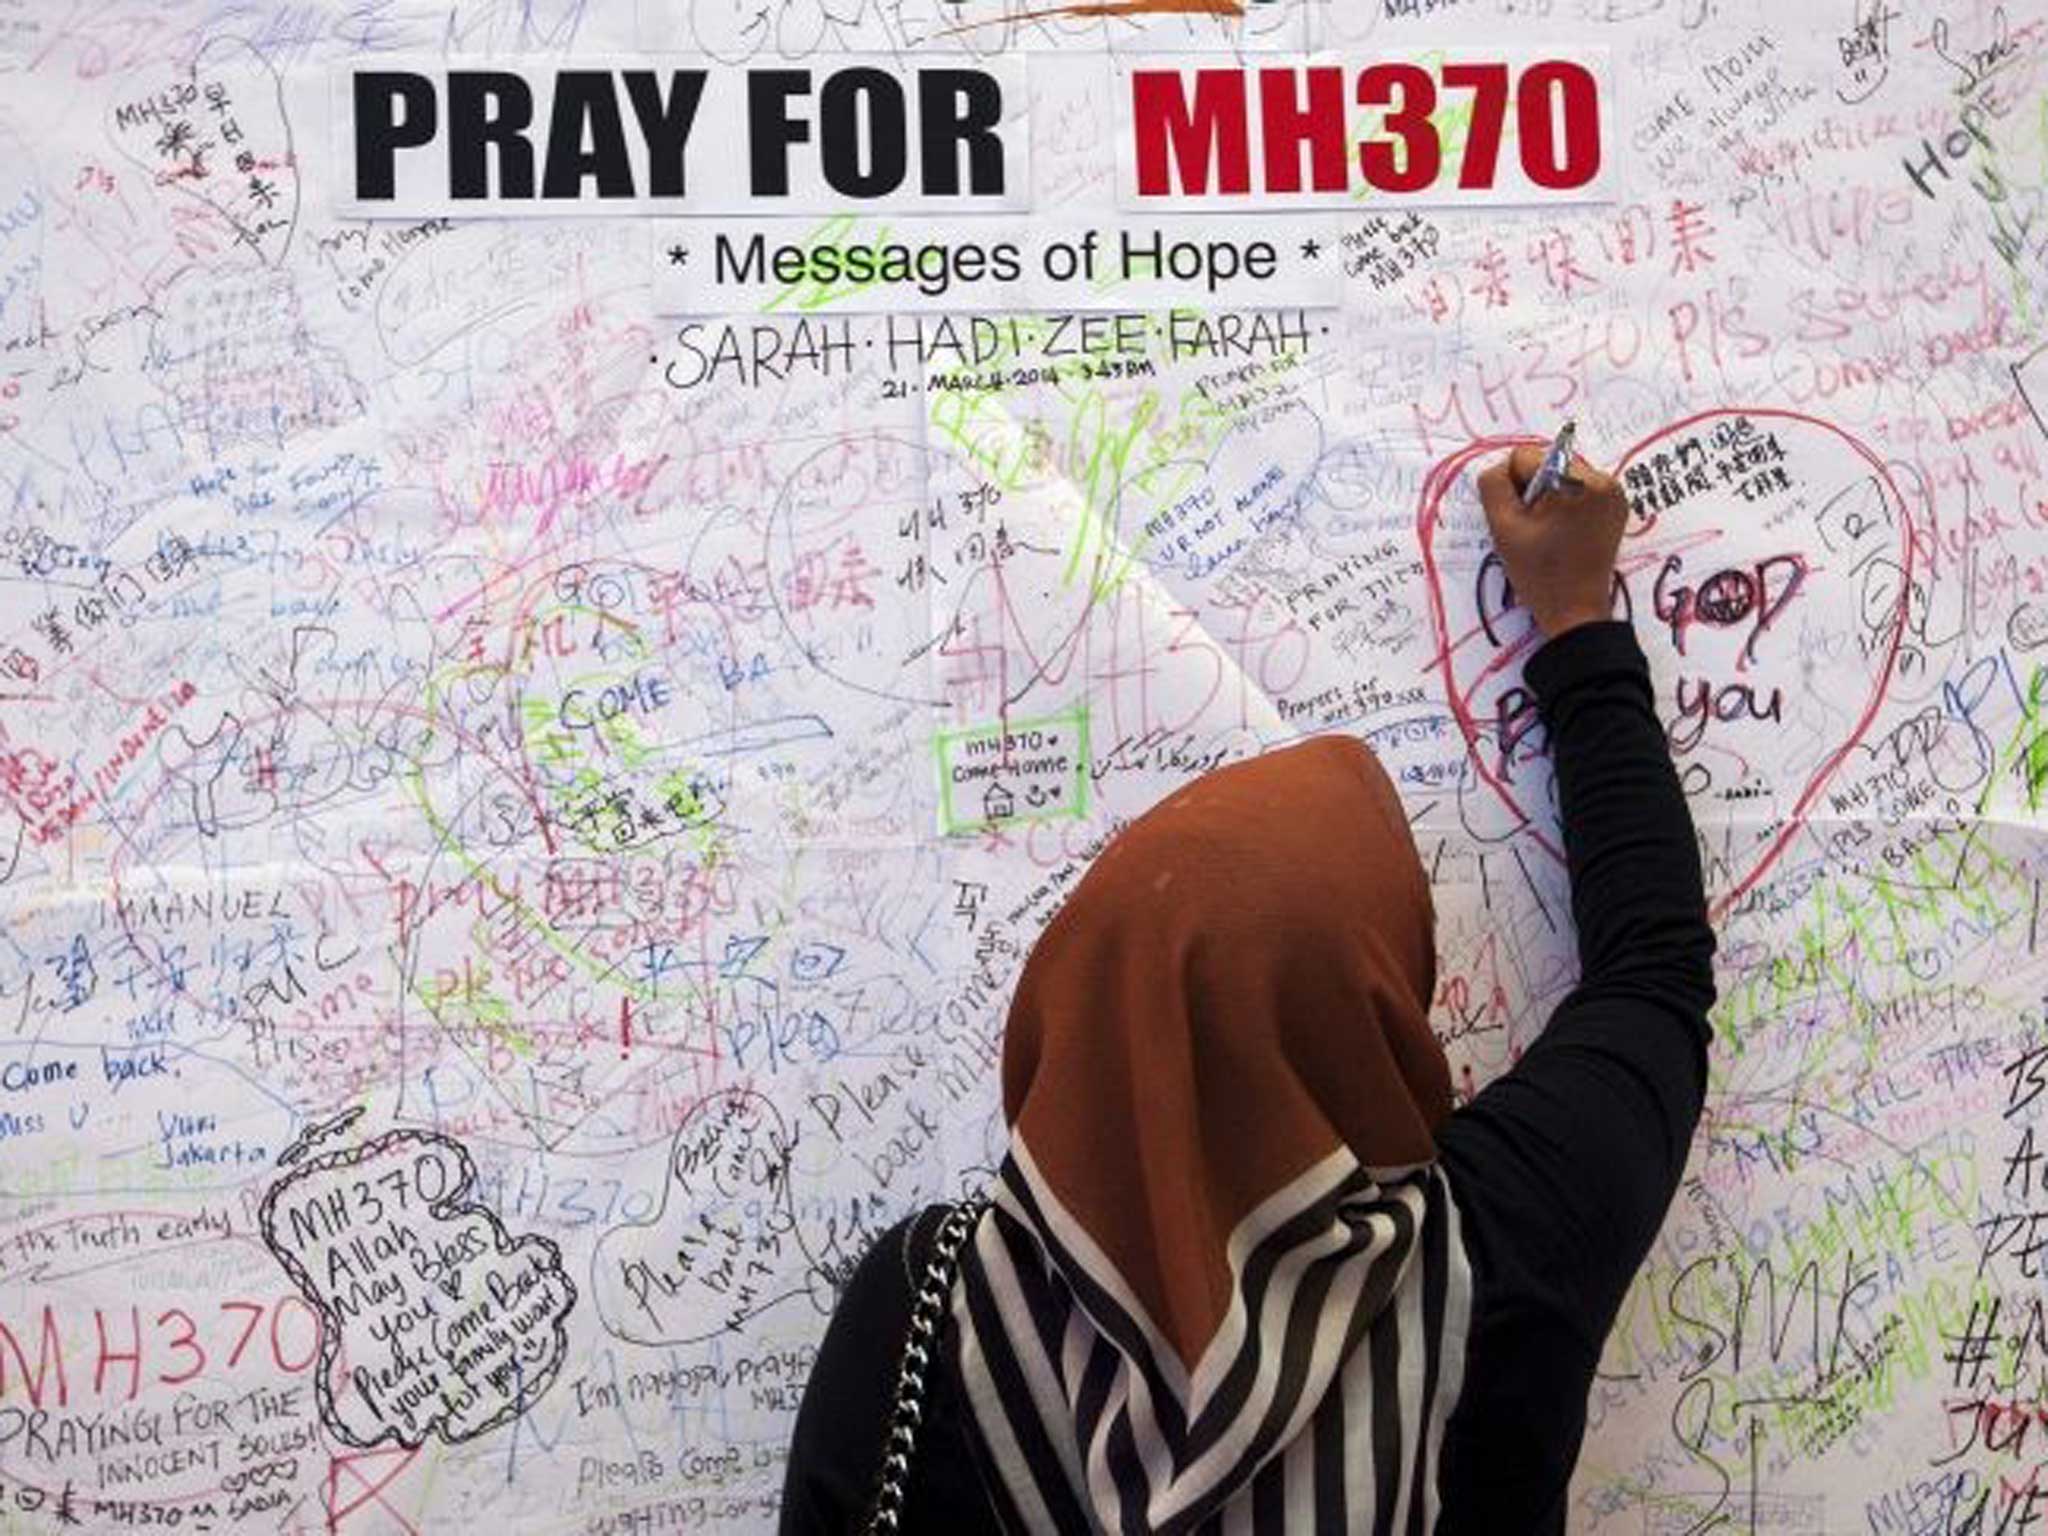 keeping faith: A visitor writes a message of support in Kuala Lumpur